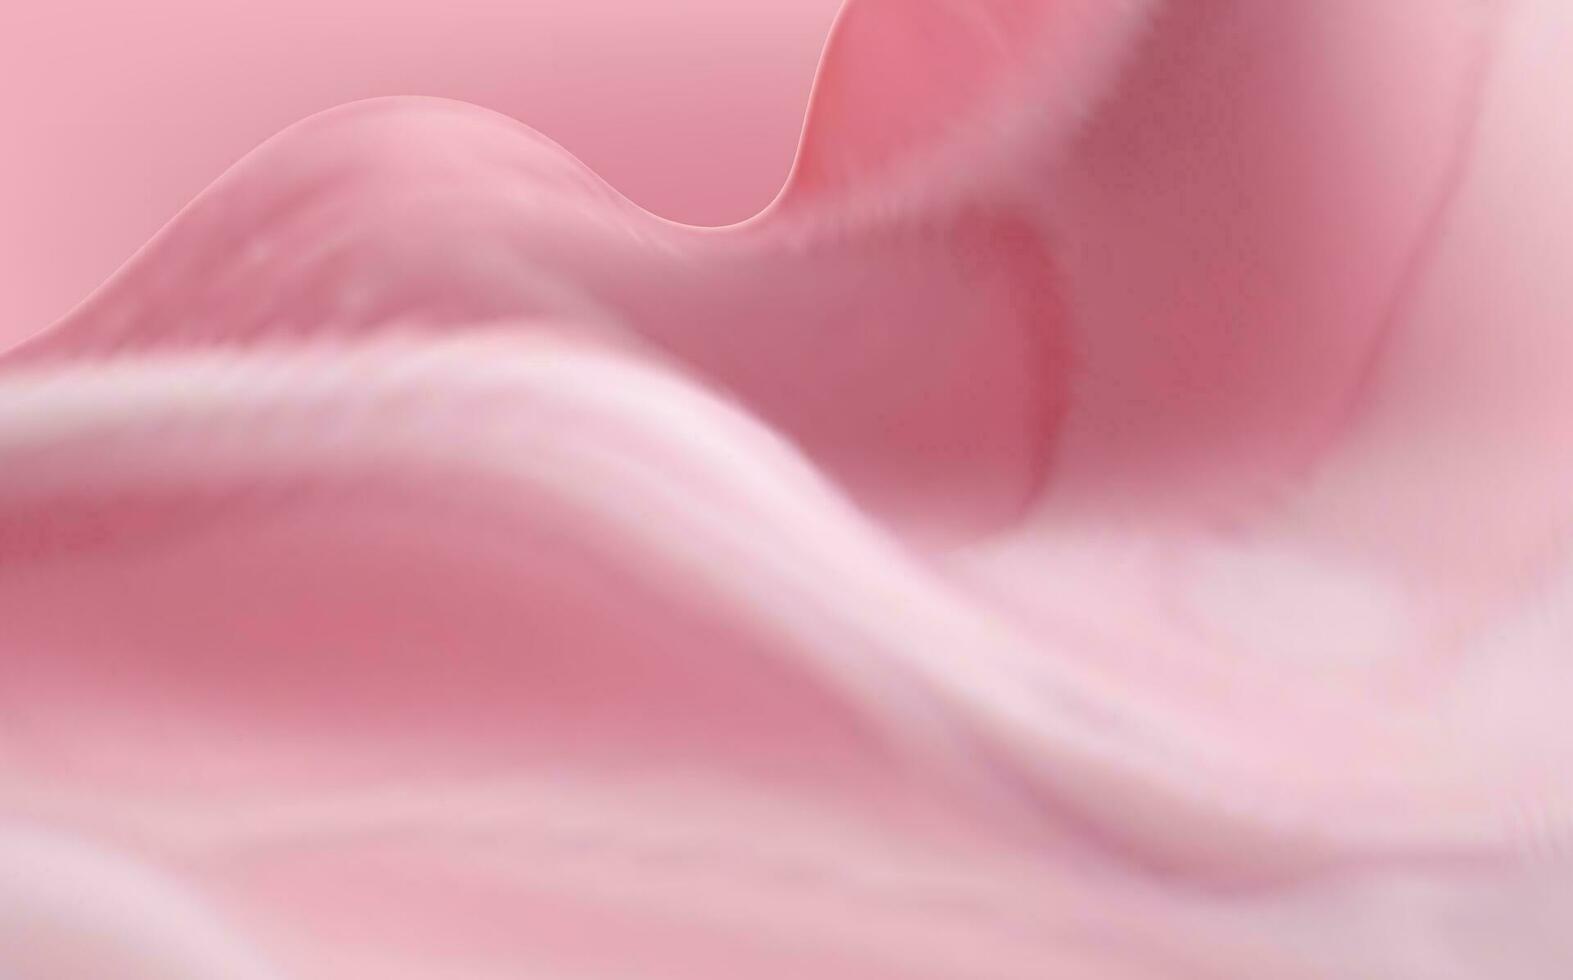 Pink spreading texture of cream, ice cream or icing. Light background of strawberry dessert, jelly or confectionery cream. vector